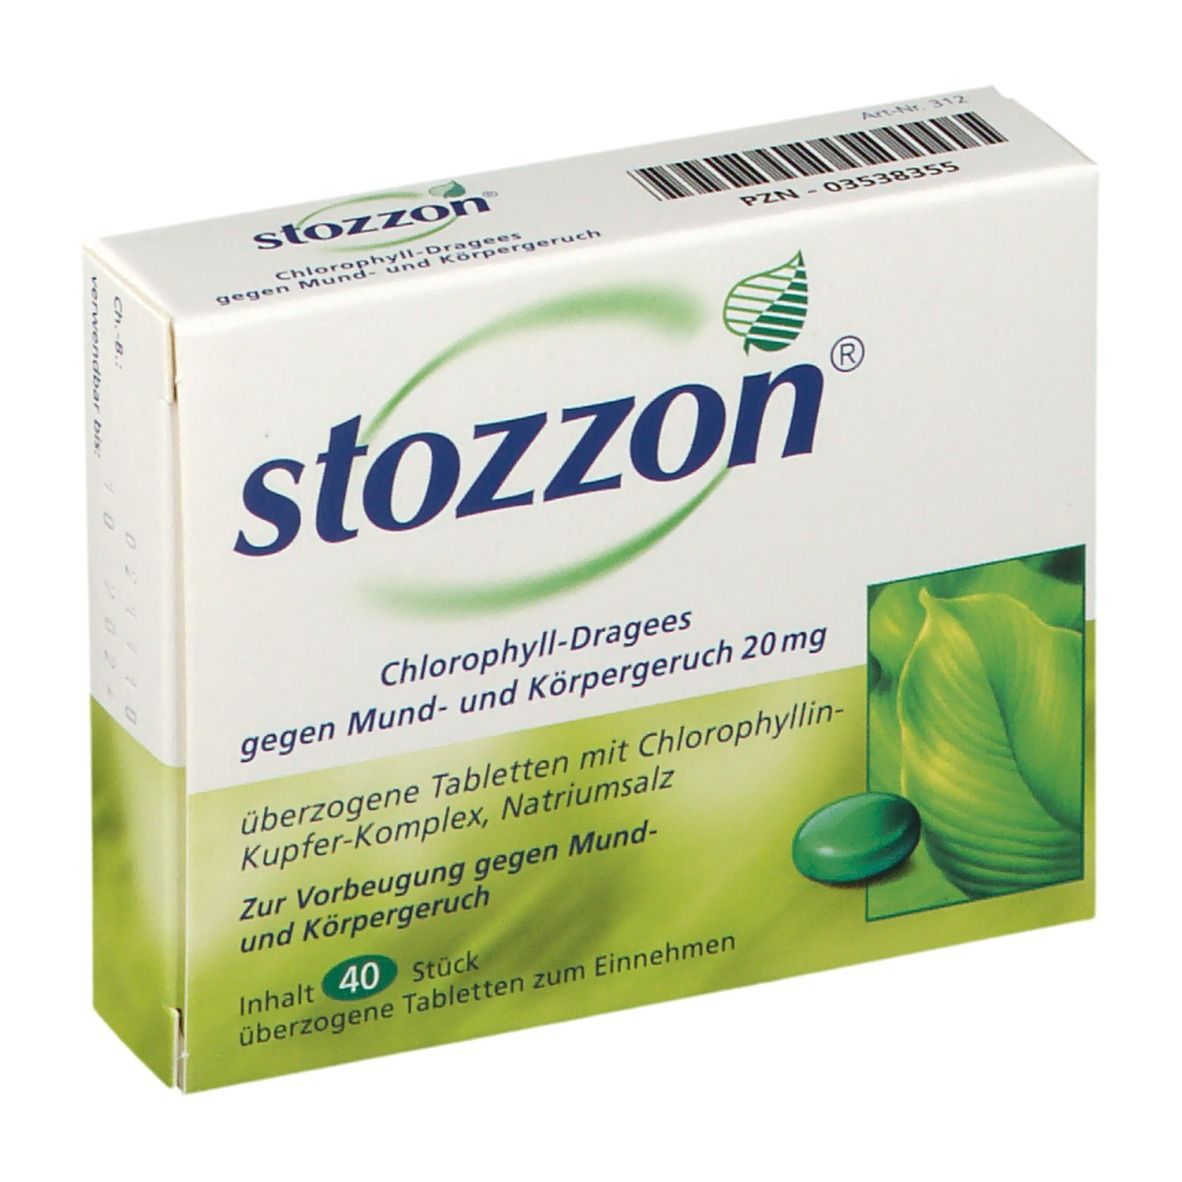 stozzon® Chlorophyll-Dragees